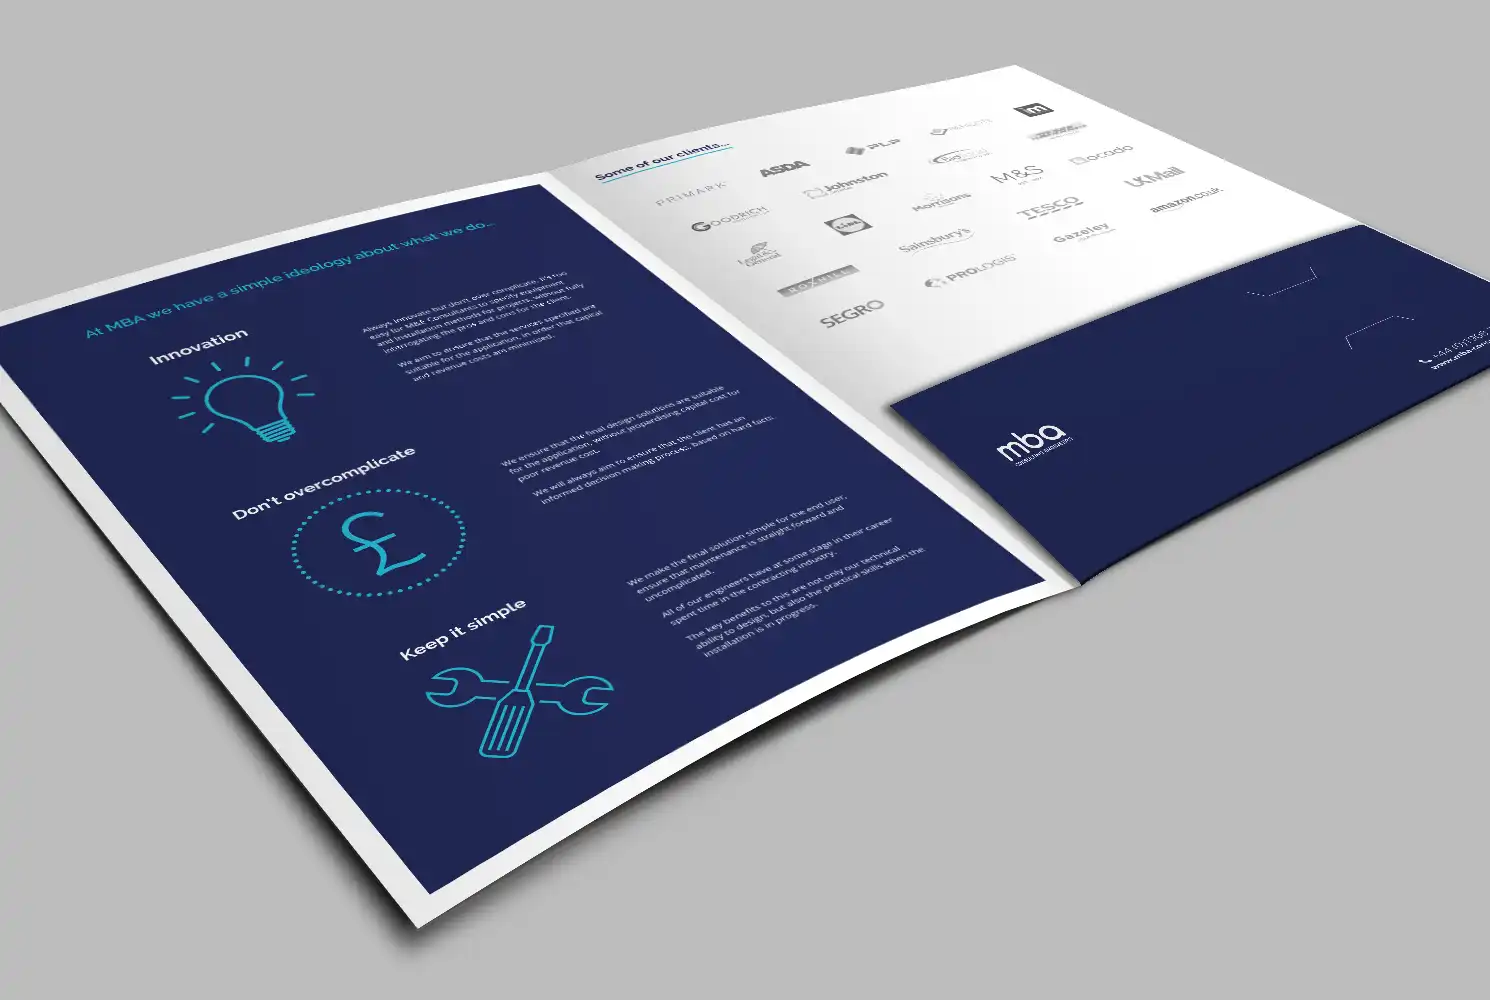 Mock up of the MBA presentation folder showing the fold out page